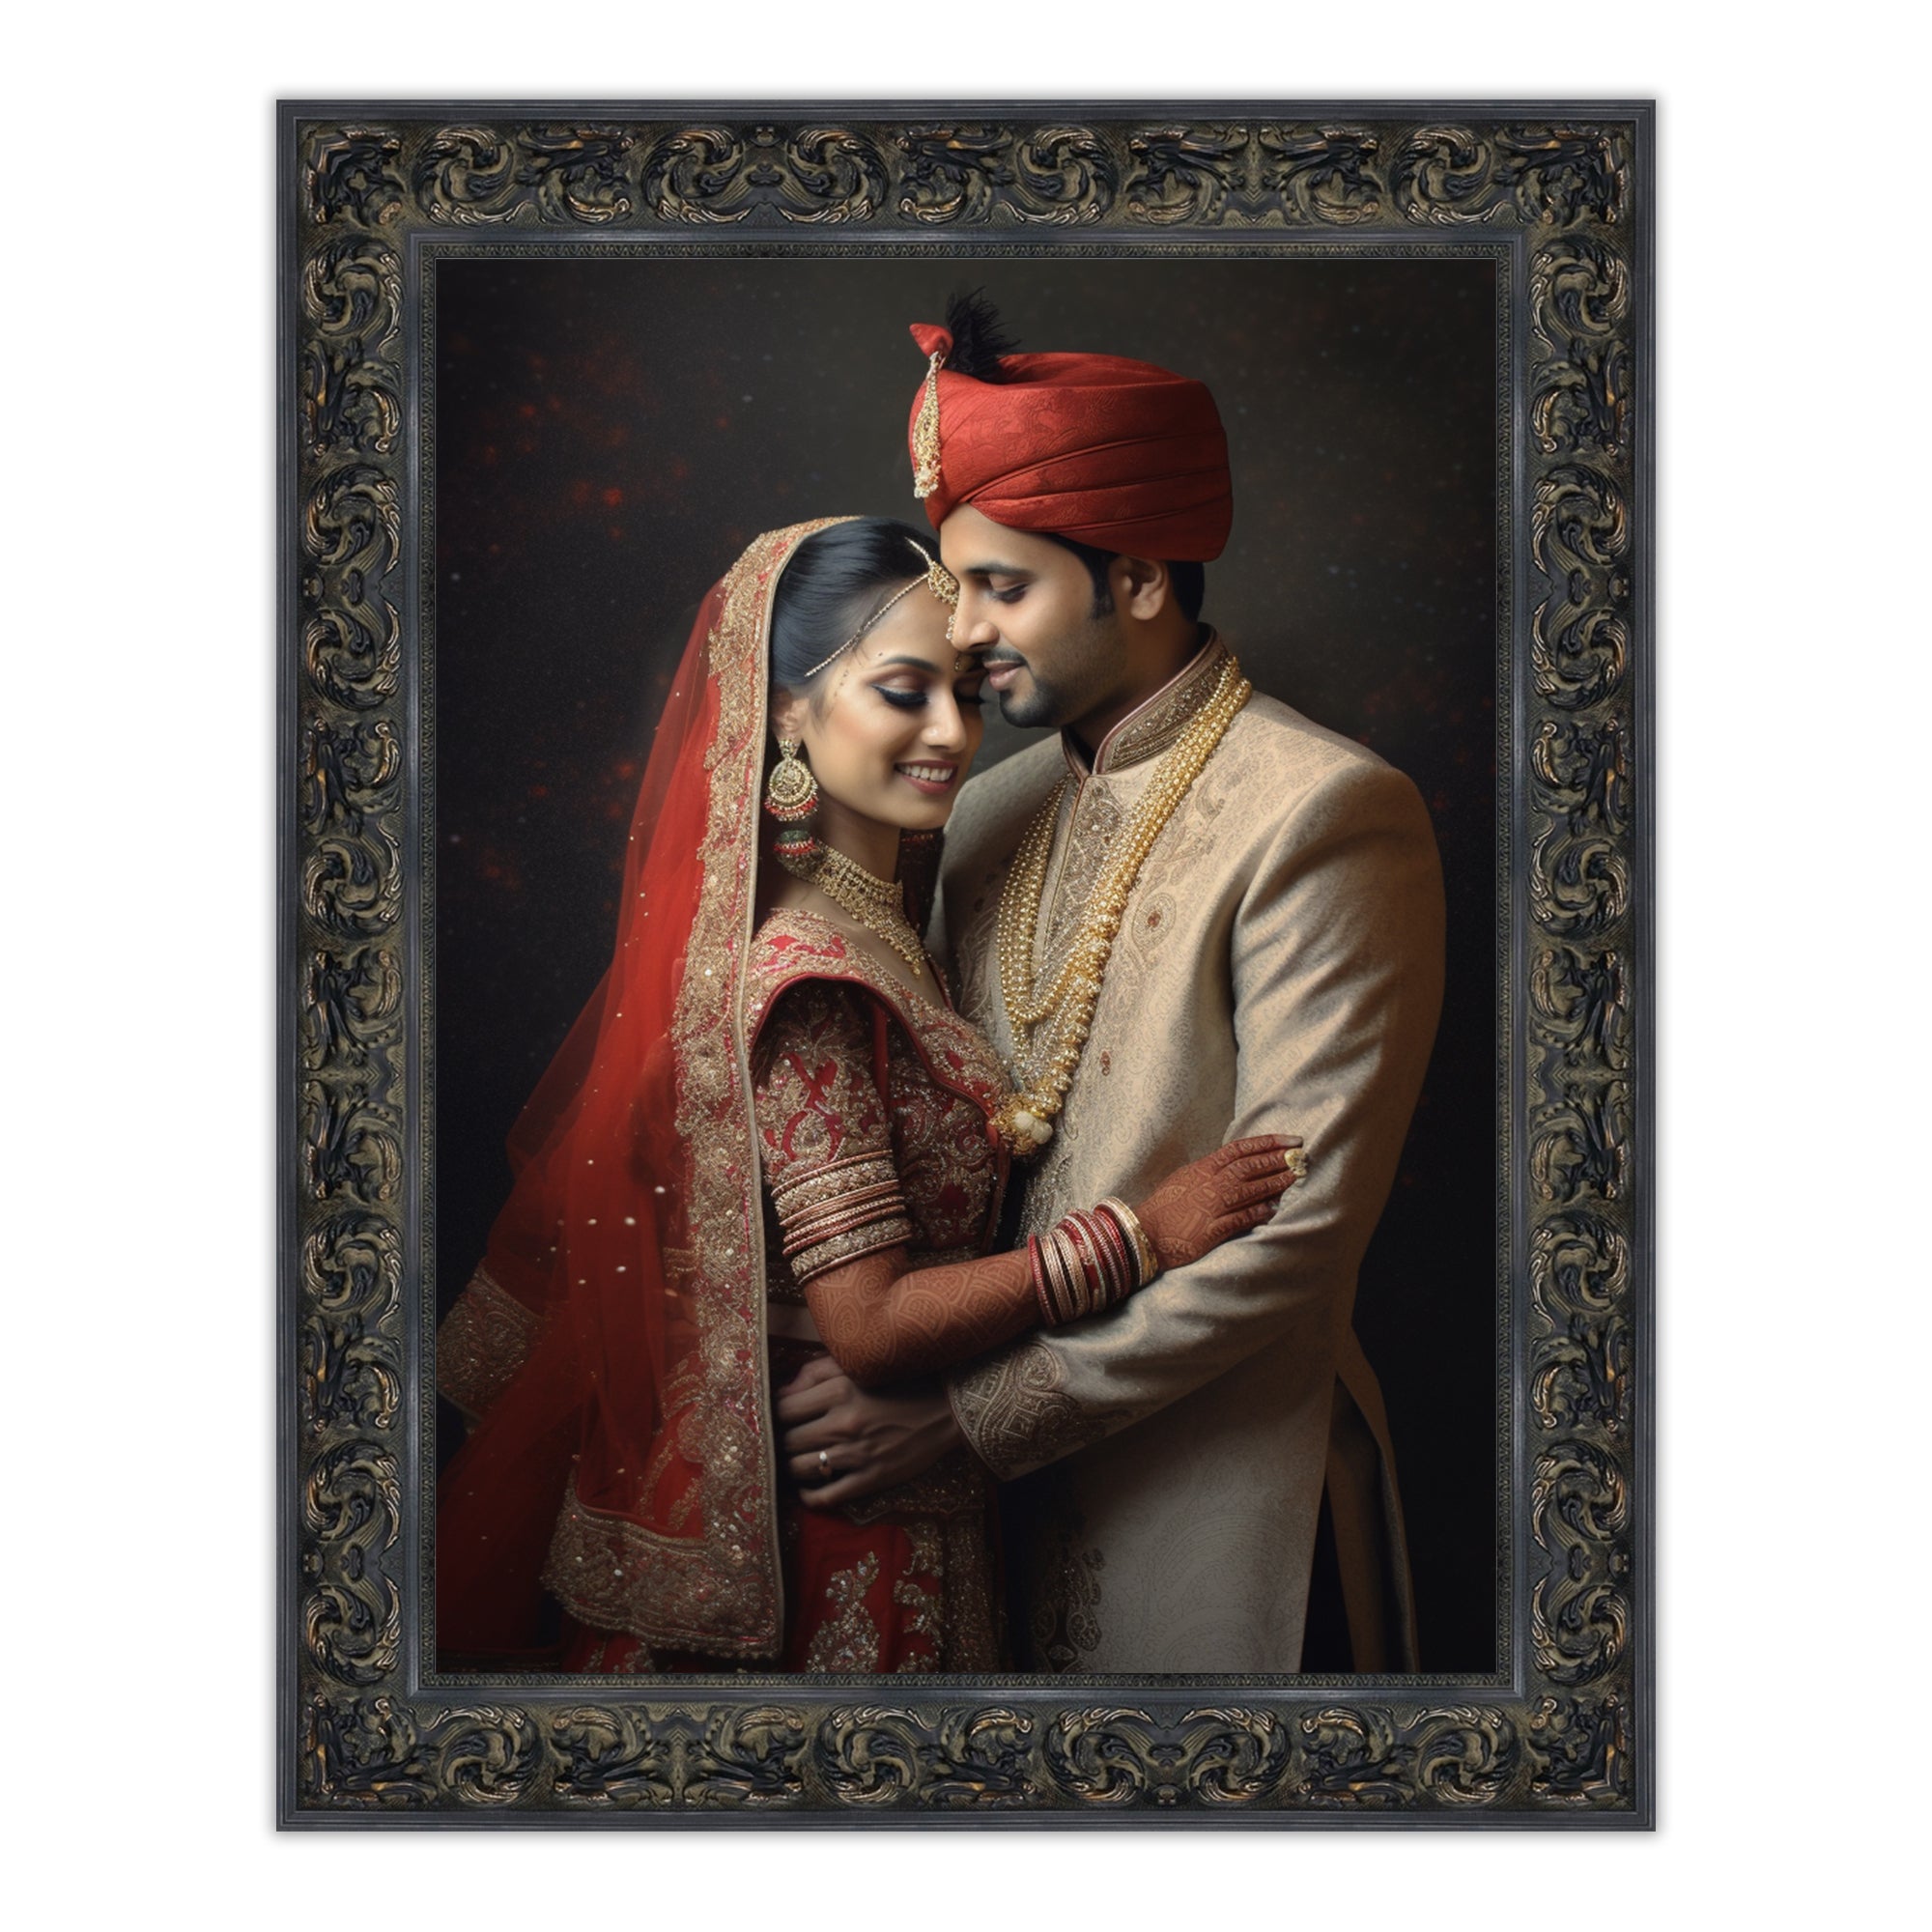 Grand Frame - 27" x 36" Picture Size